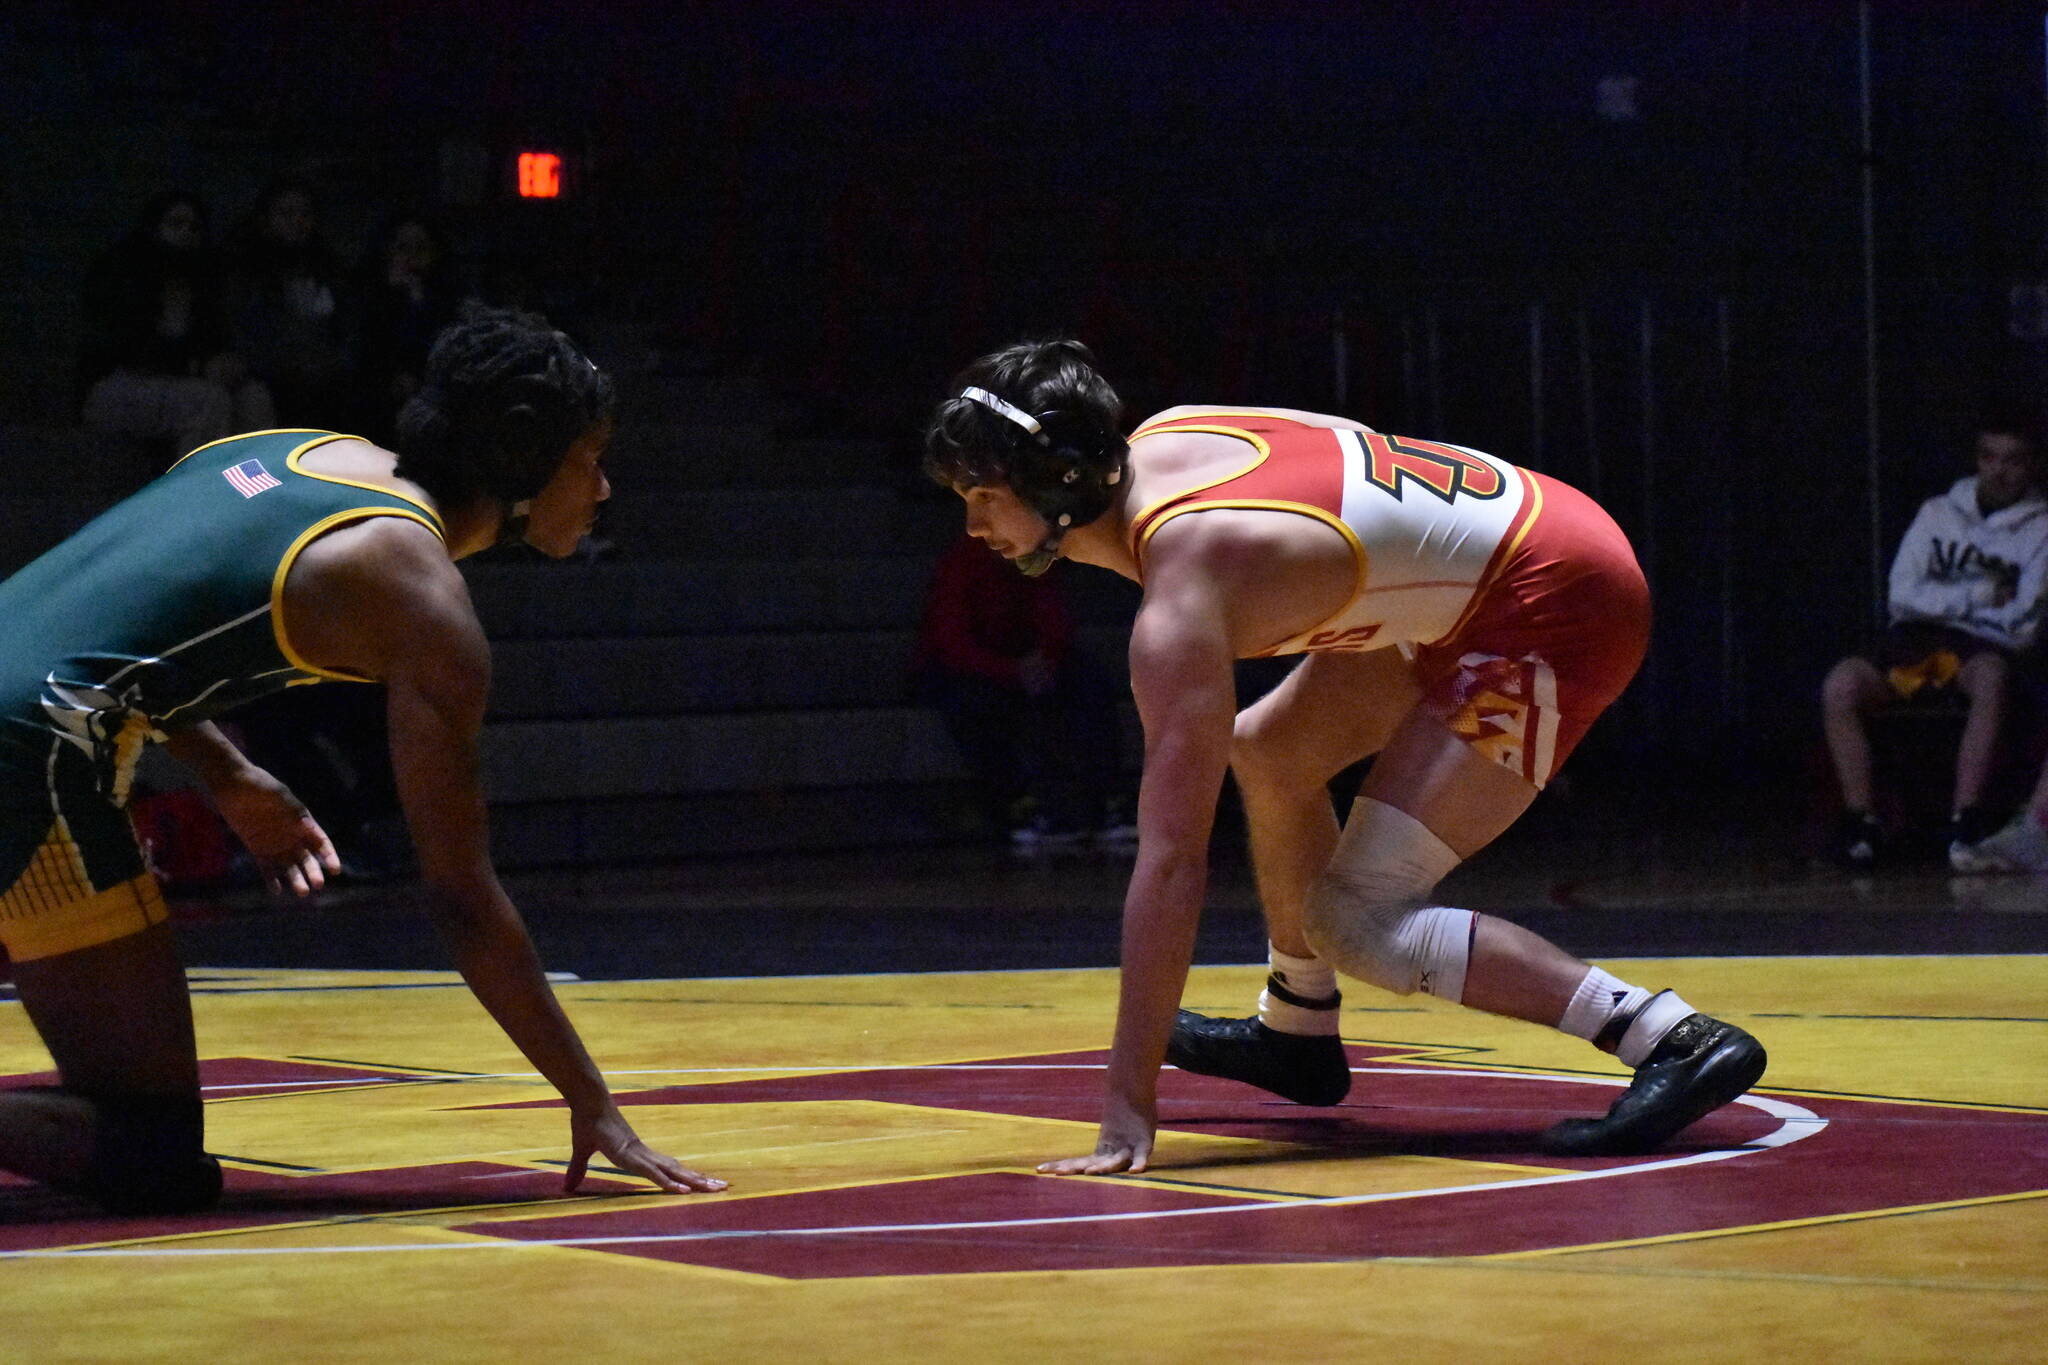 TJ captain CJ Trevino wrestling to help the Raiders take down the Chargers. Ben Ray/ The Mirror